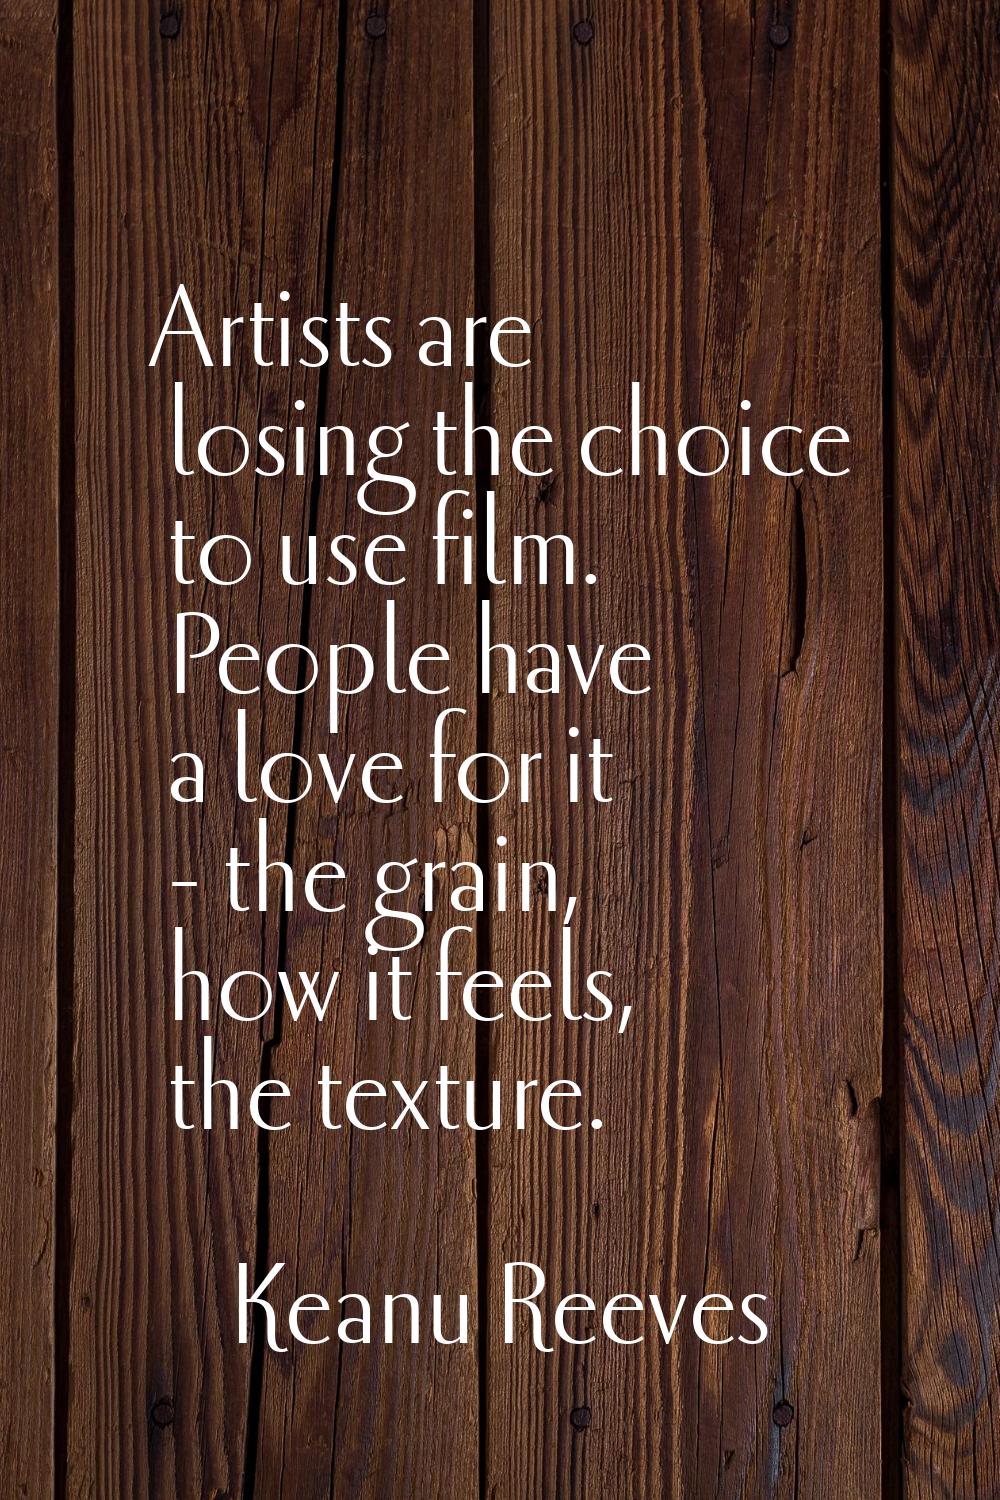 Artists are losing the choice to use film. People have a love for it - the grain, how it feels, the